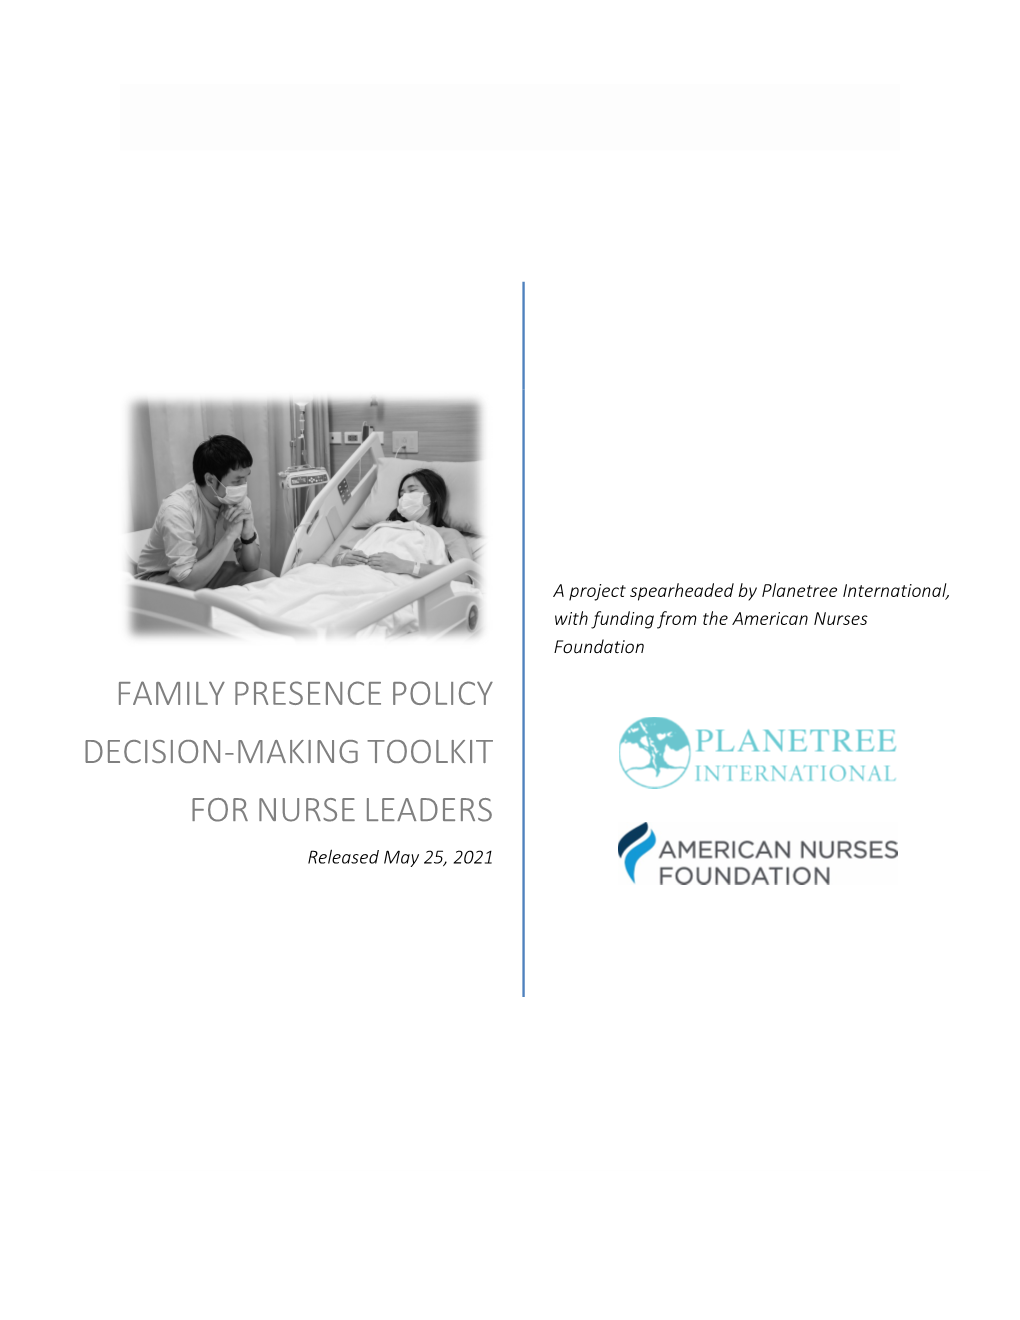 FAMILY PRESENCE POLICY DECISION-MAKING TOOLKIT for NURSE LEADERS Released May 25, 2021